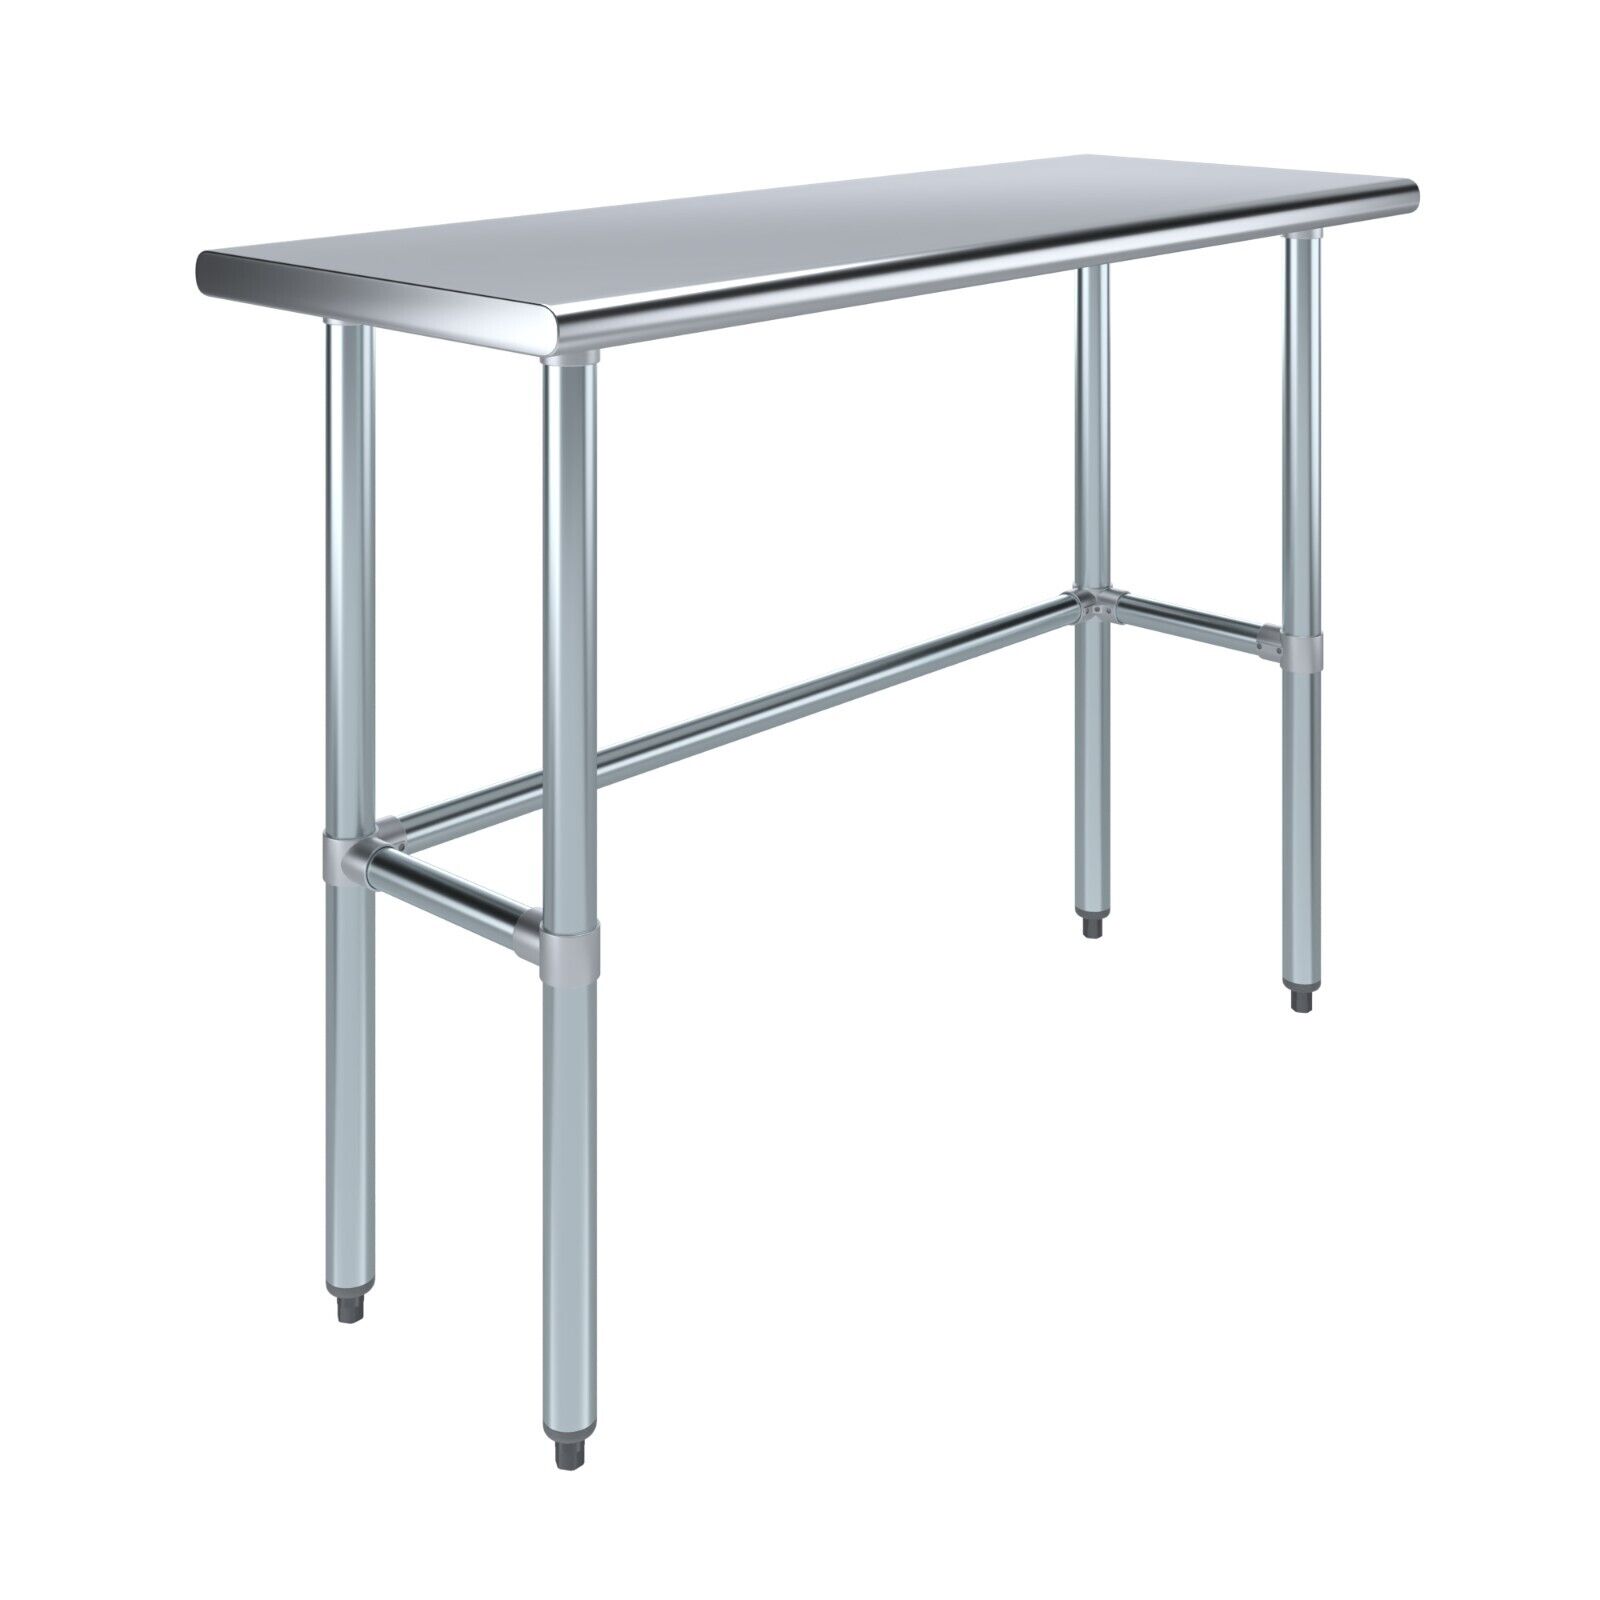 18 in. x 48 in. Open Base Stainless Steel Work Table | Residential & Commercial